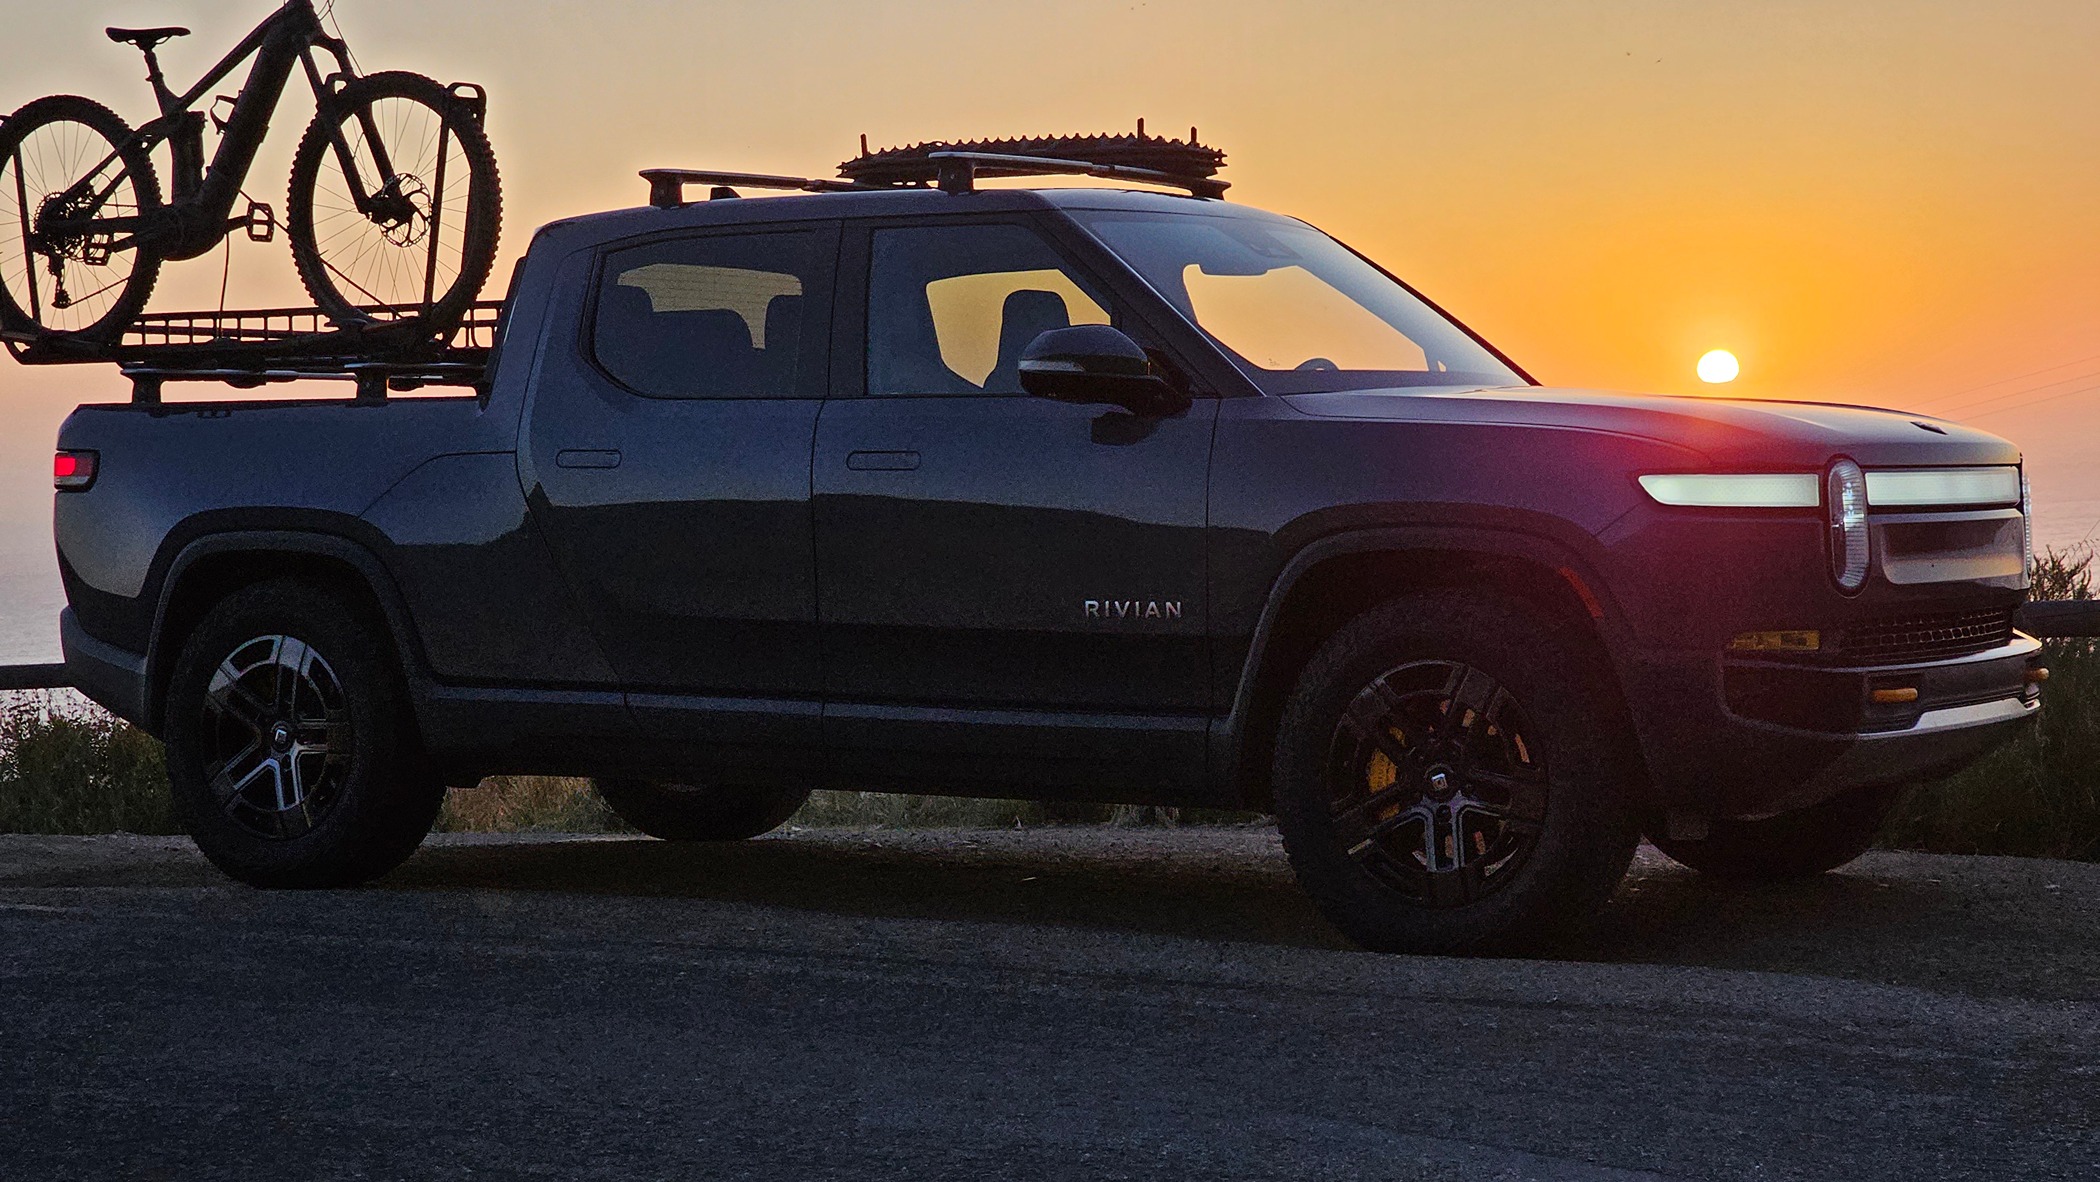 Rivian R1T R1S Random Rivian Photos of the Day - Post Yours! 📸 🤳 20240508_195156